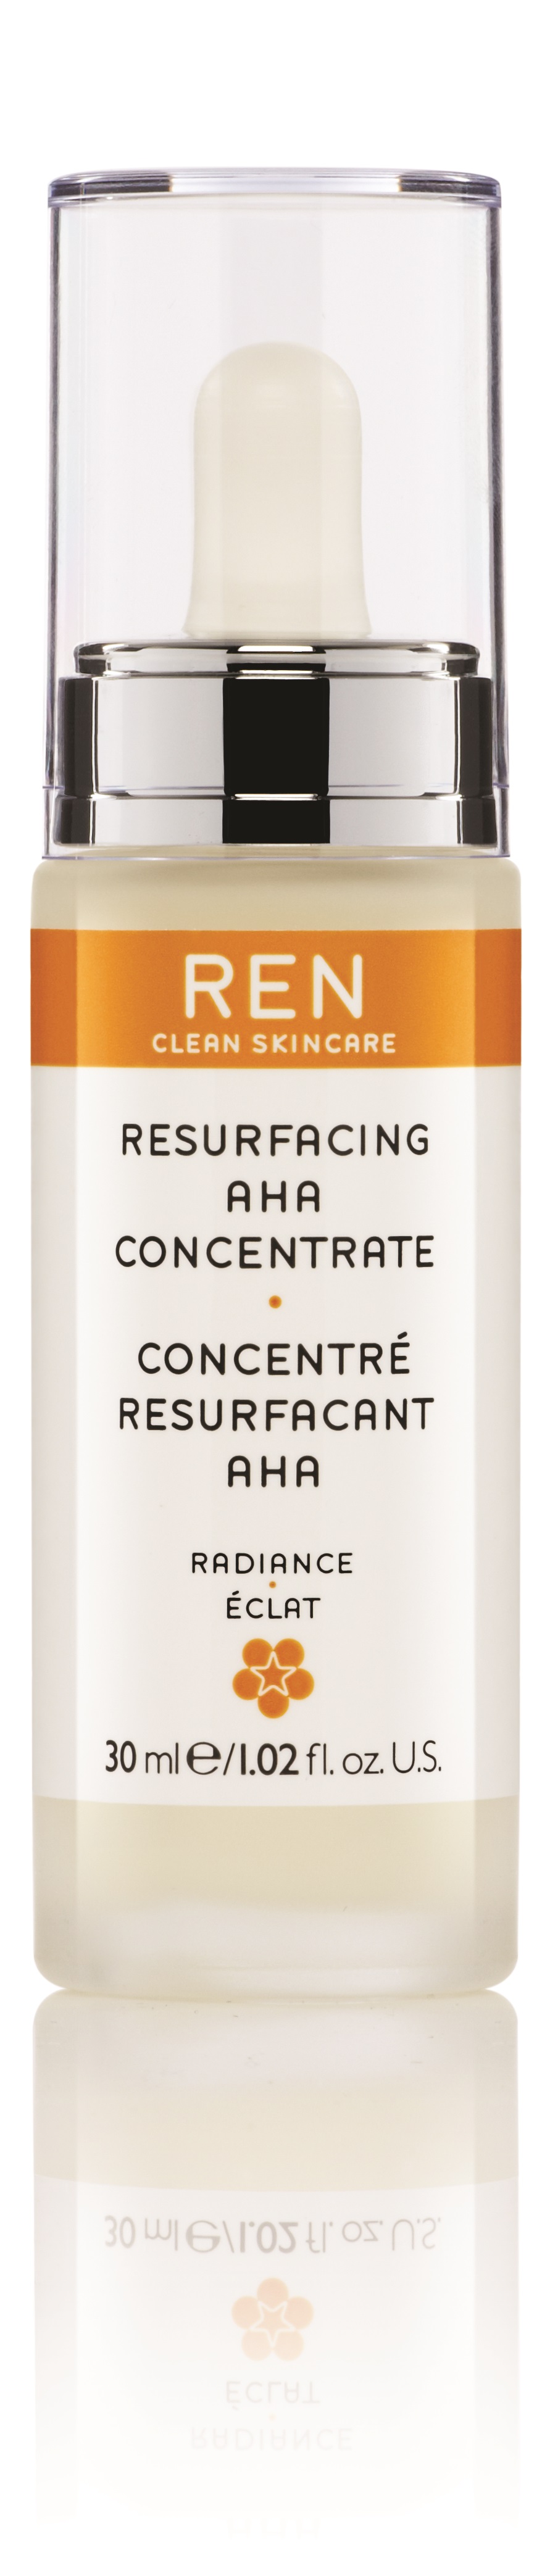 REN Anti-Age Radiance Resurfacing Aha Concentrate